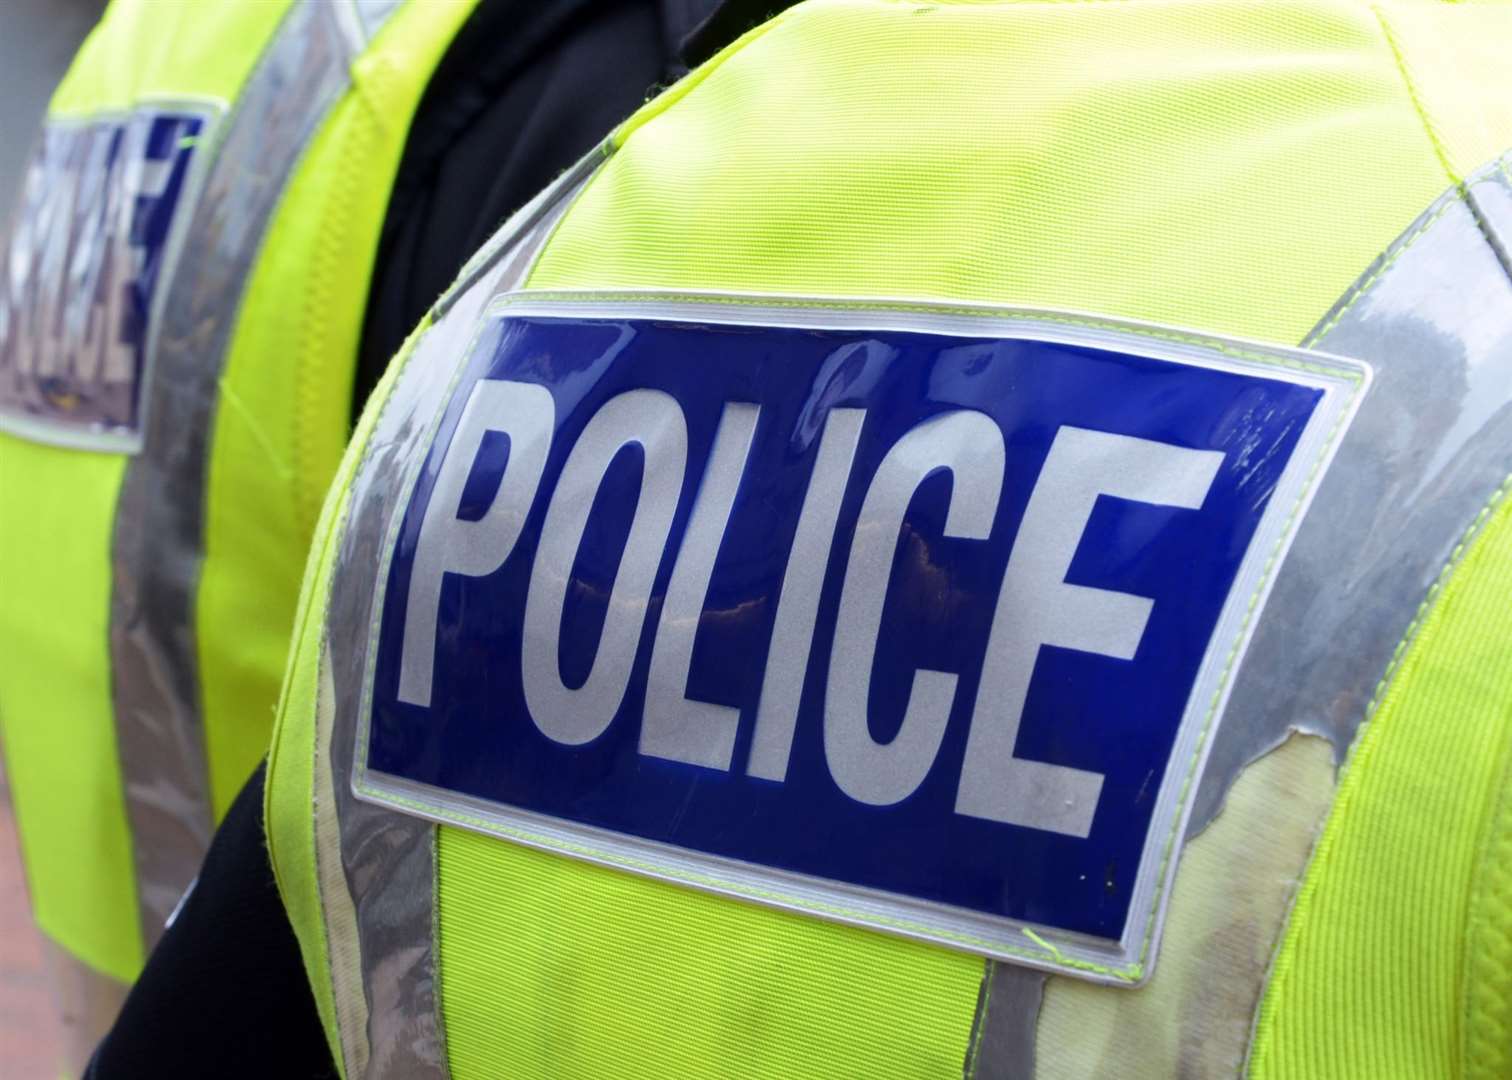 Police are appealing for information after heating fuel was stolen from a home near Keith.